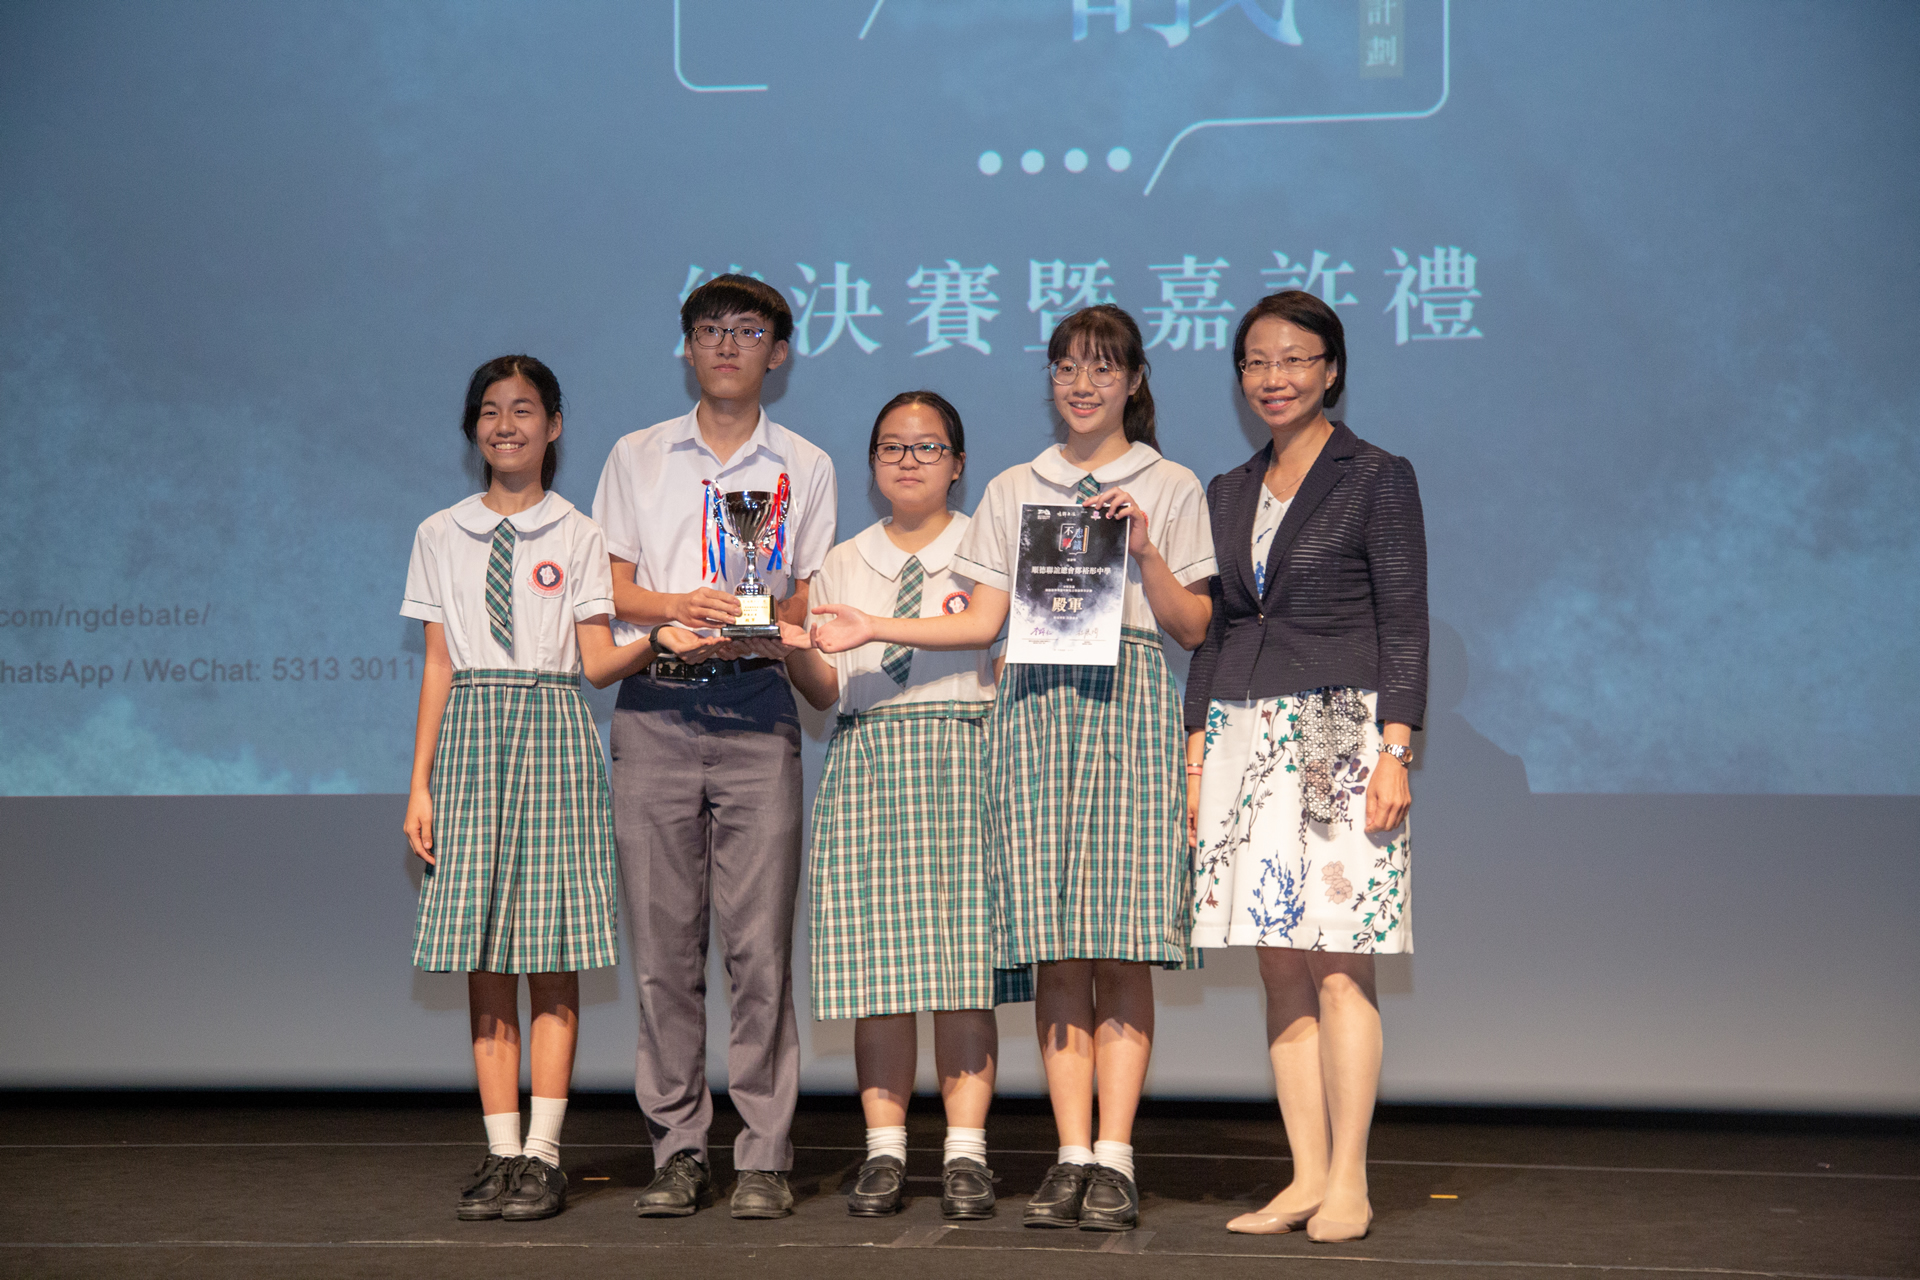 Shun Tak Fraternal Association Cheng Yu Tung Secondary School ranked the fourth in the final competition. 